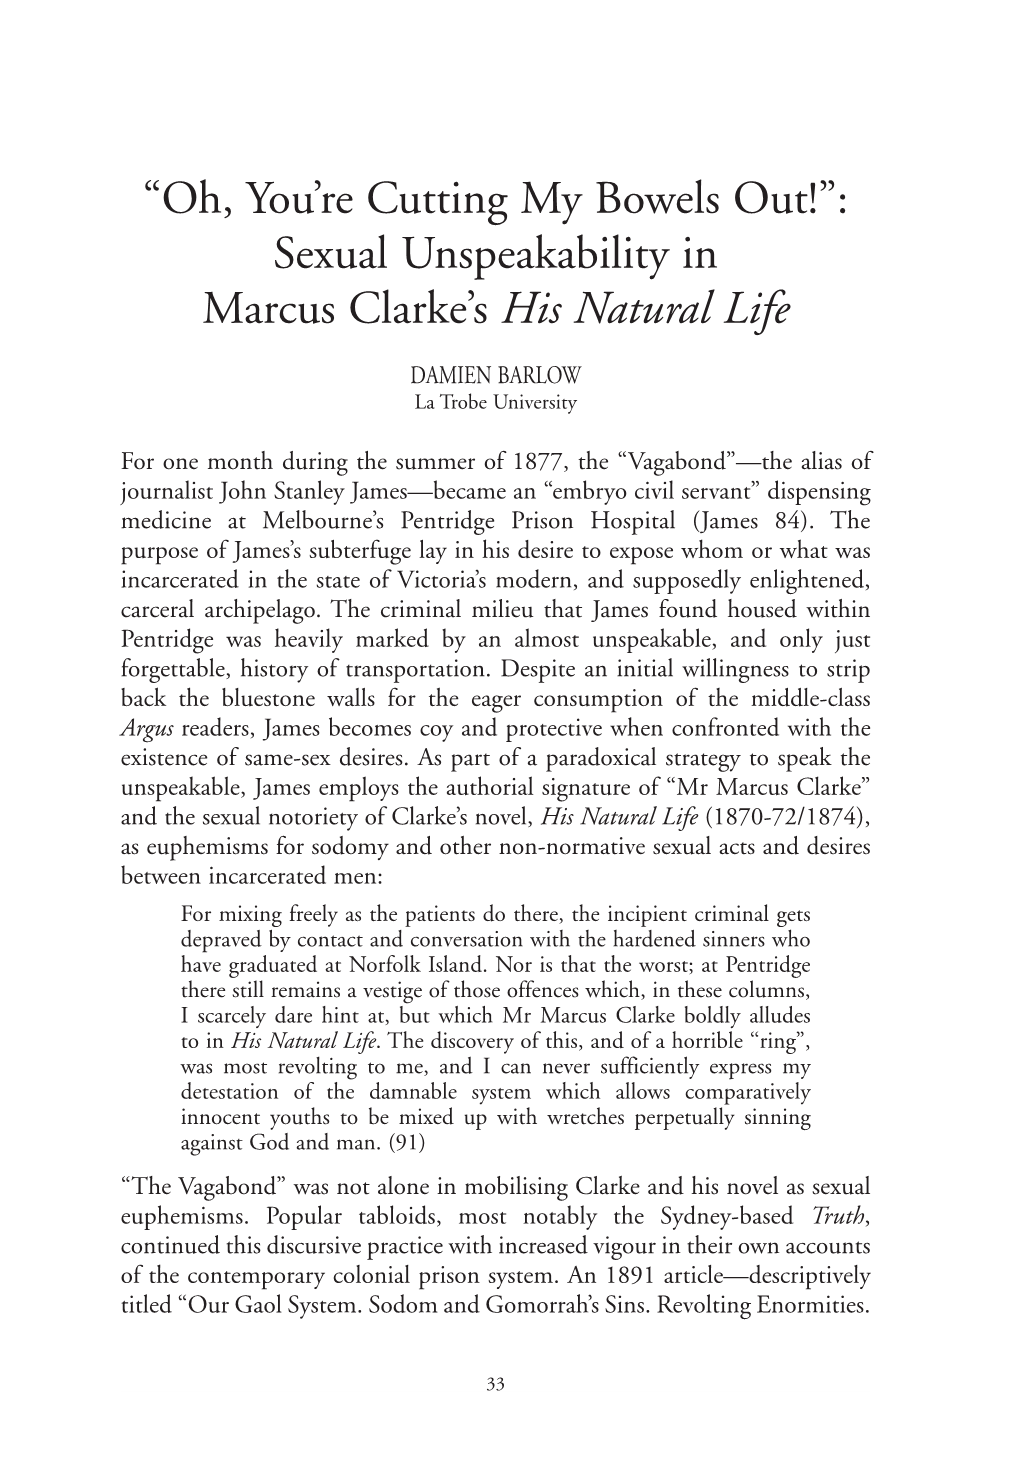 Sexual Unspeakability in Marcus Clarke's His Natural Life